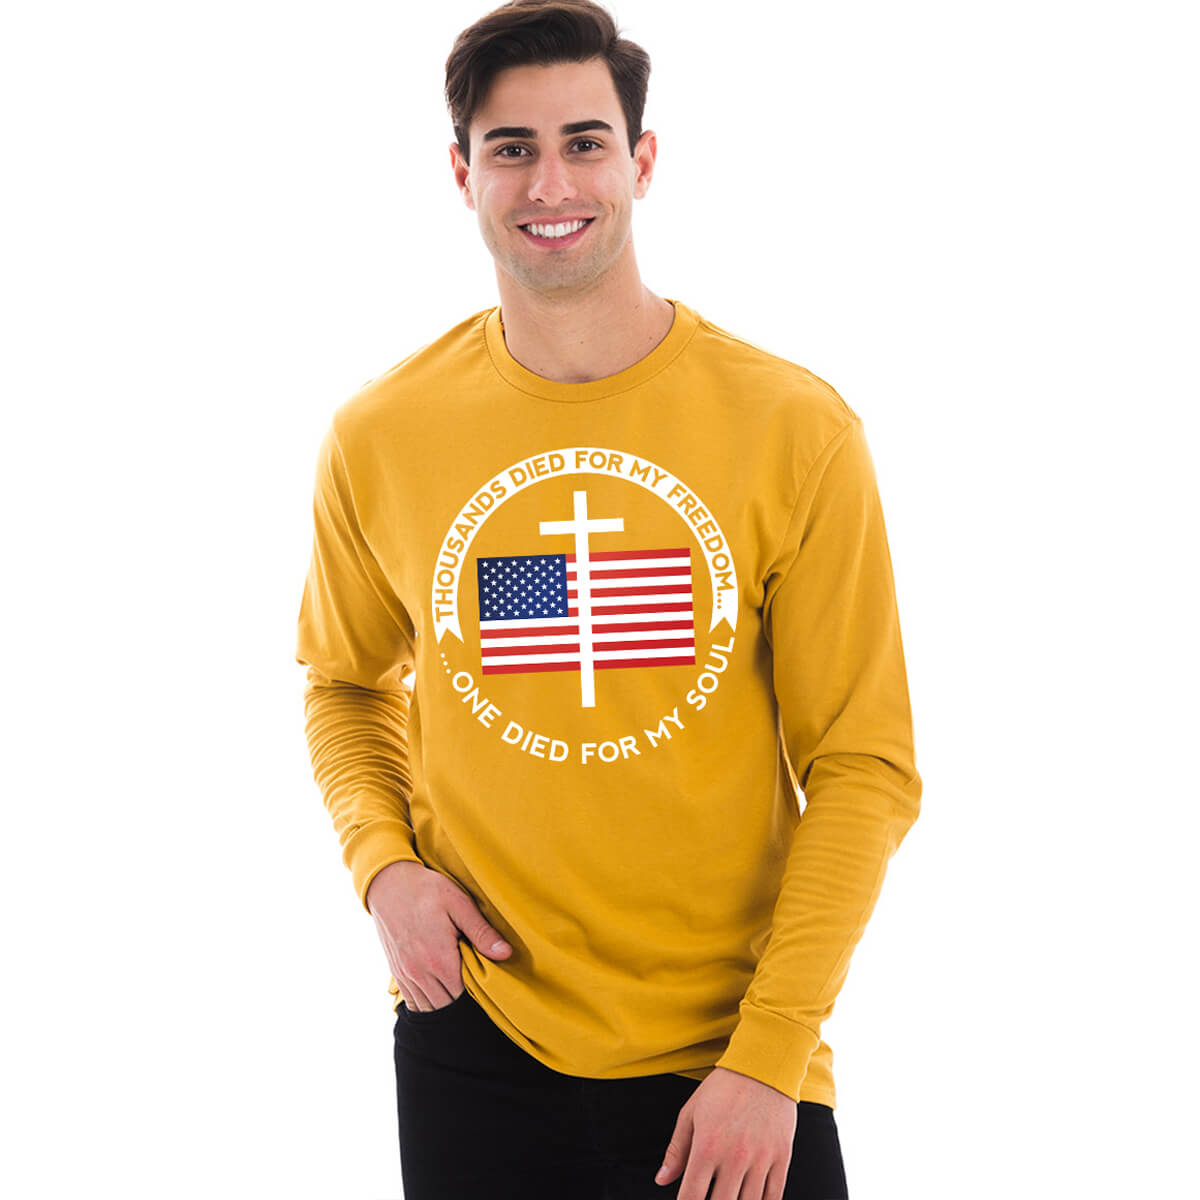 Thousands Died For My Freedom One Died For My Soul Men's Long Sleeve T Shirt